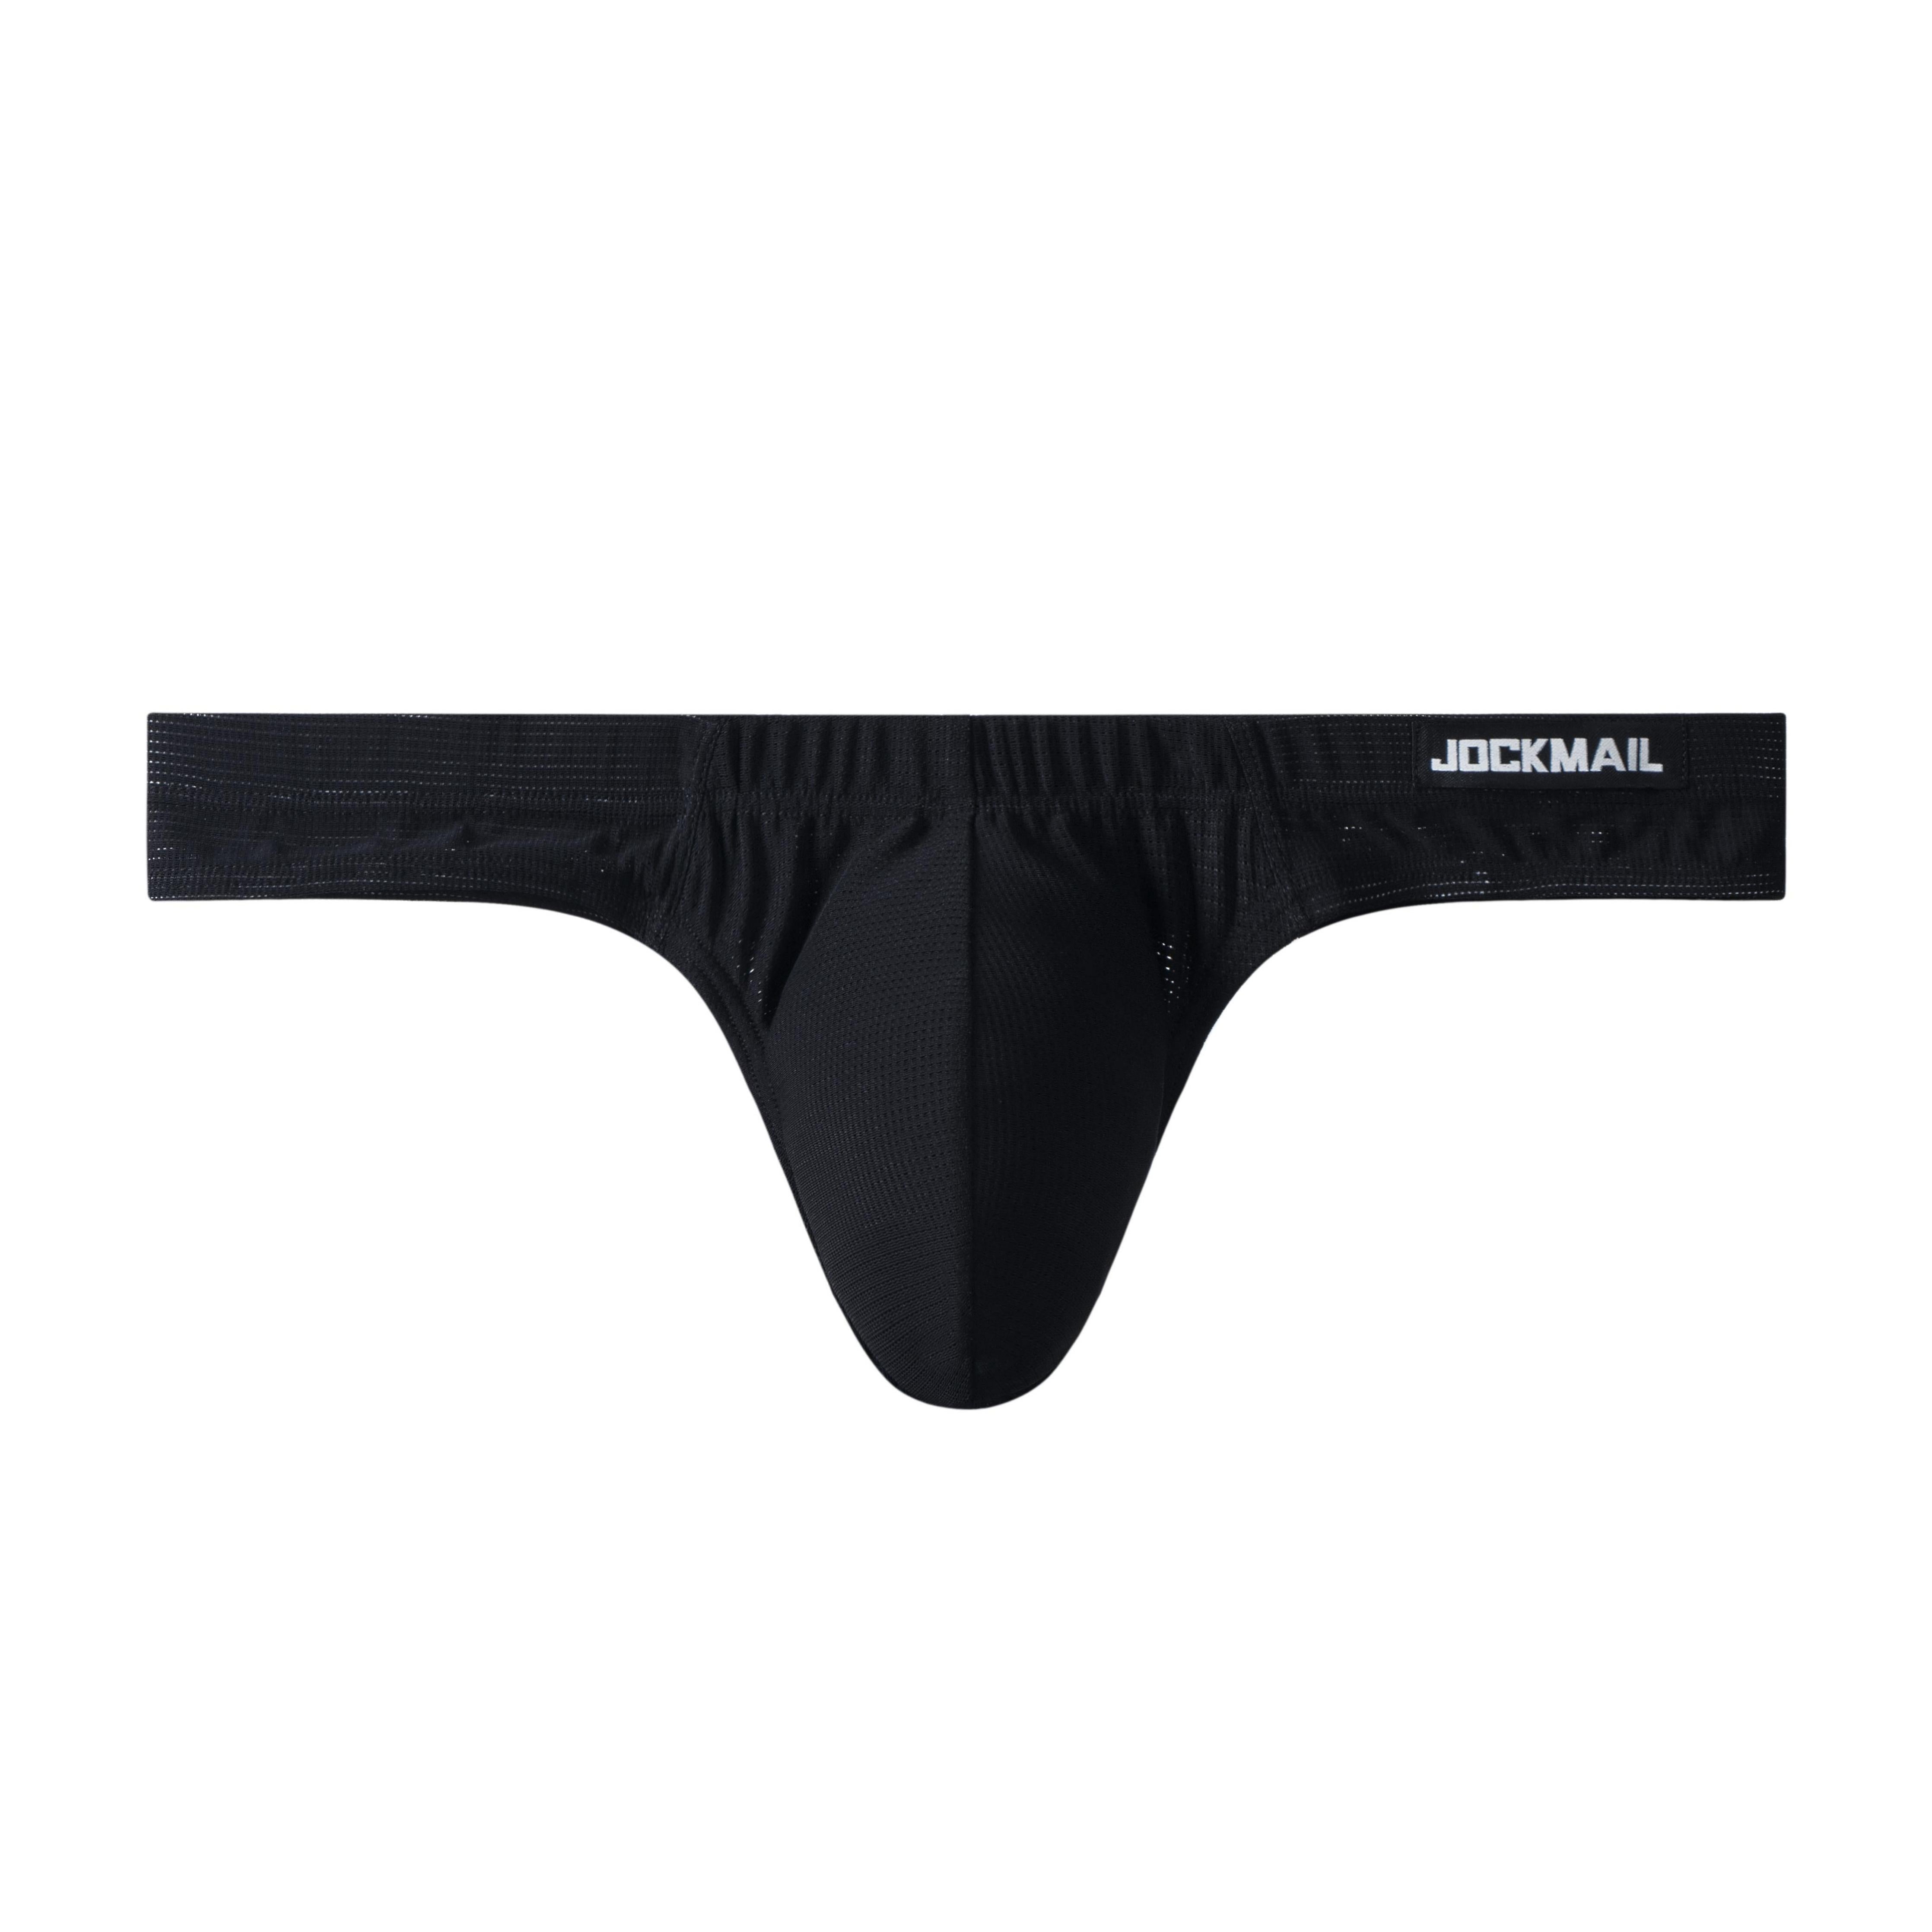 Leather Mens Thong -  Canada